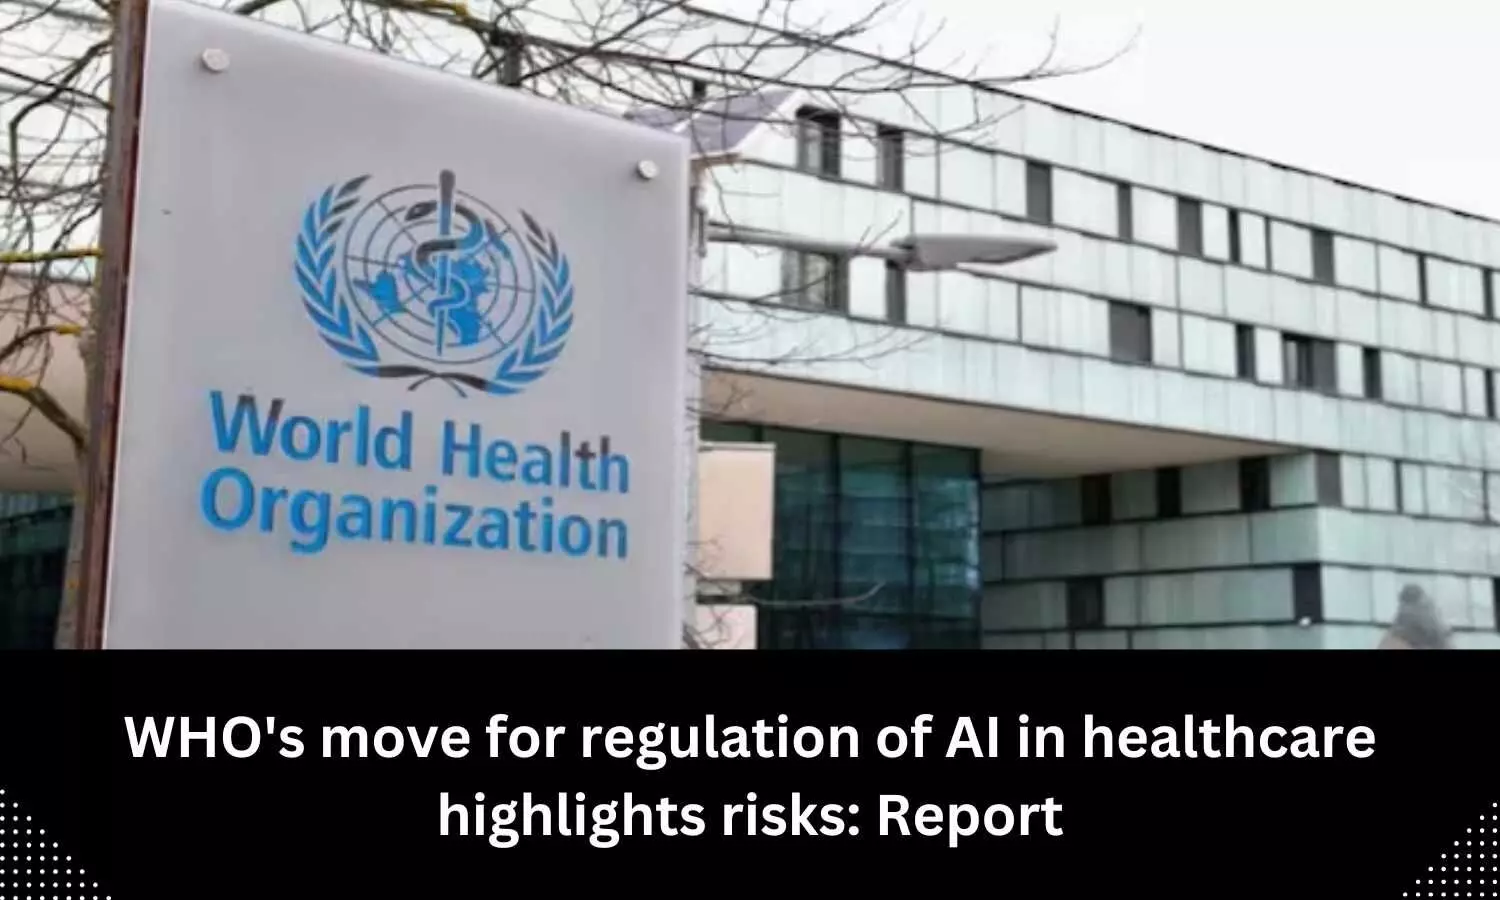 WHO considerations for AI regulation in healthcare highlights risks, says Report